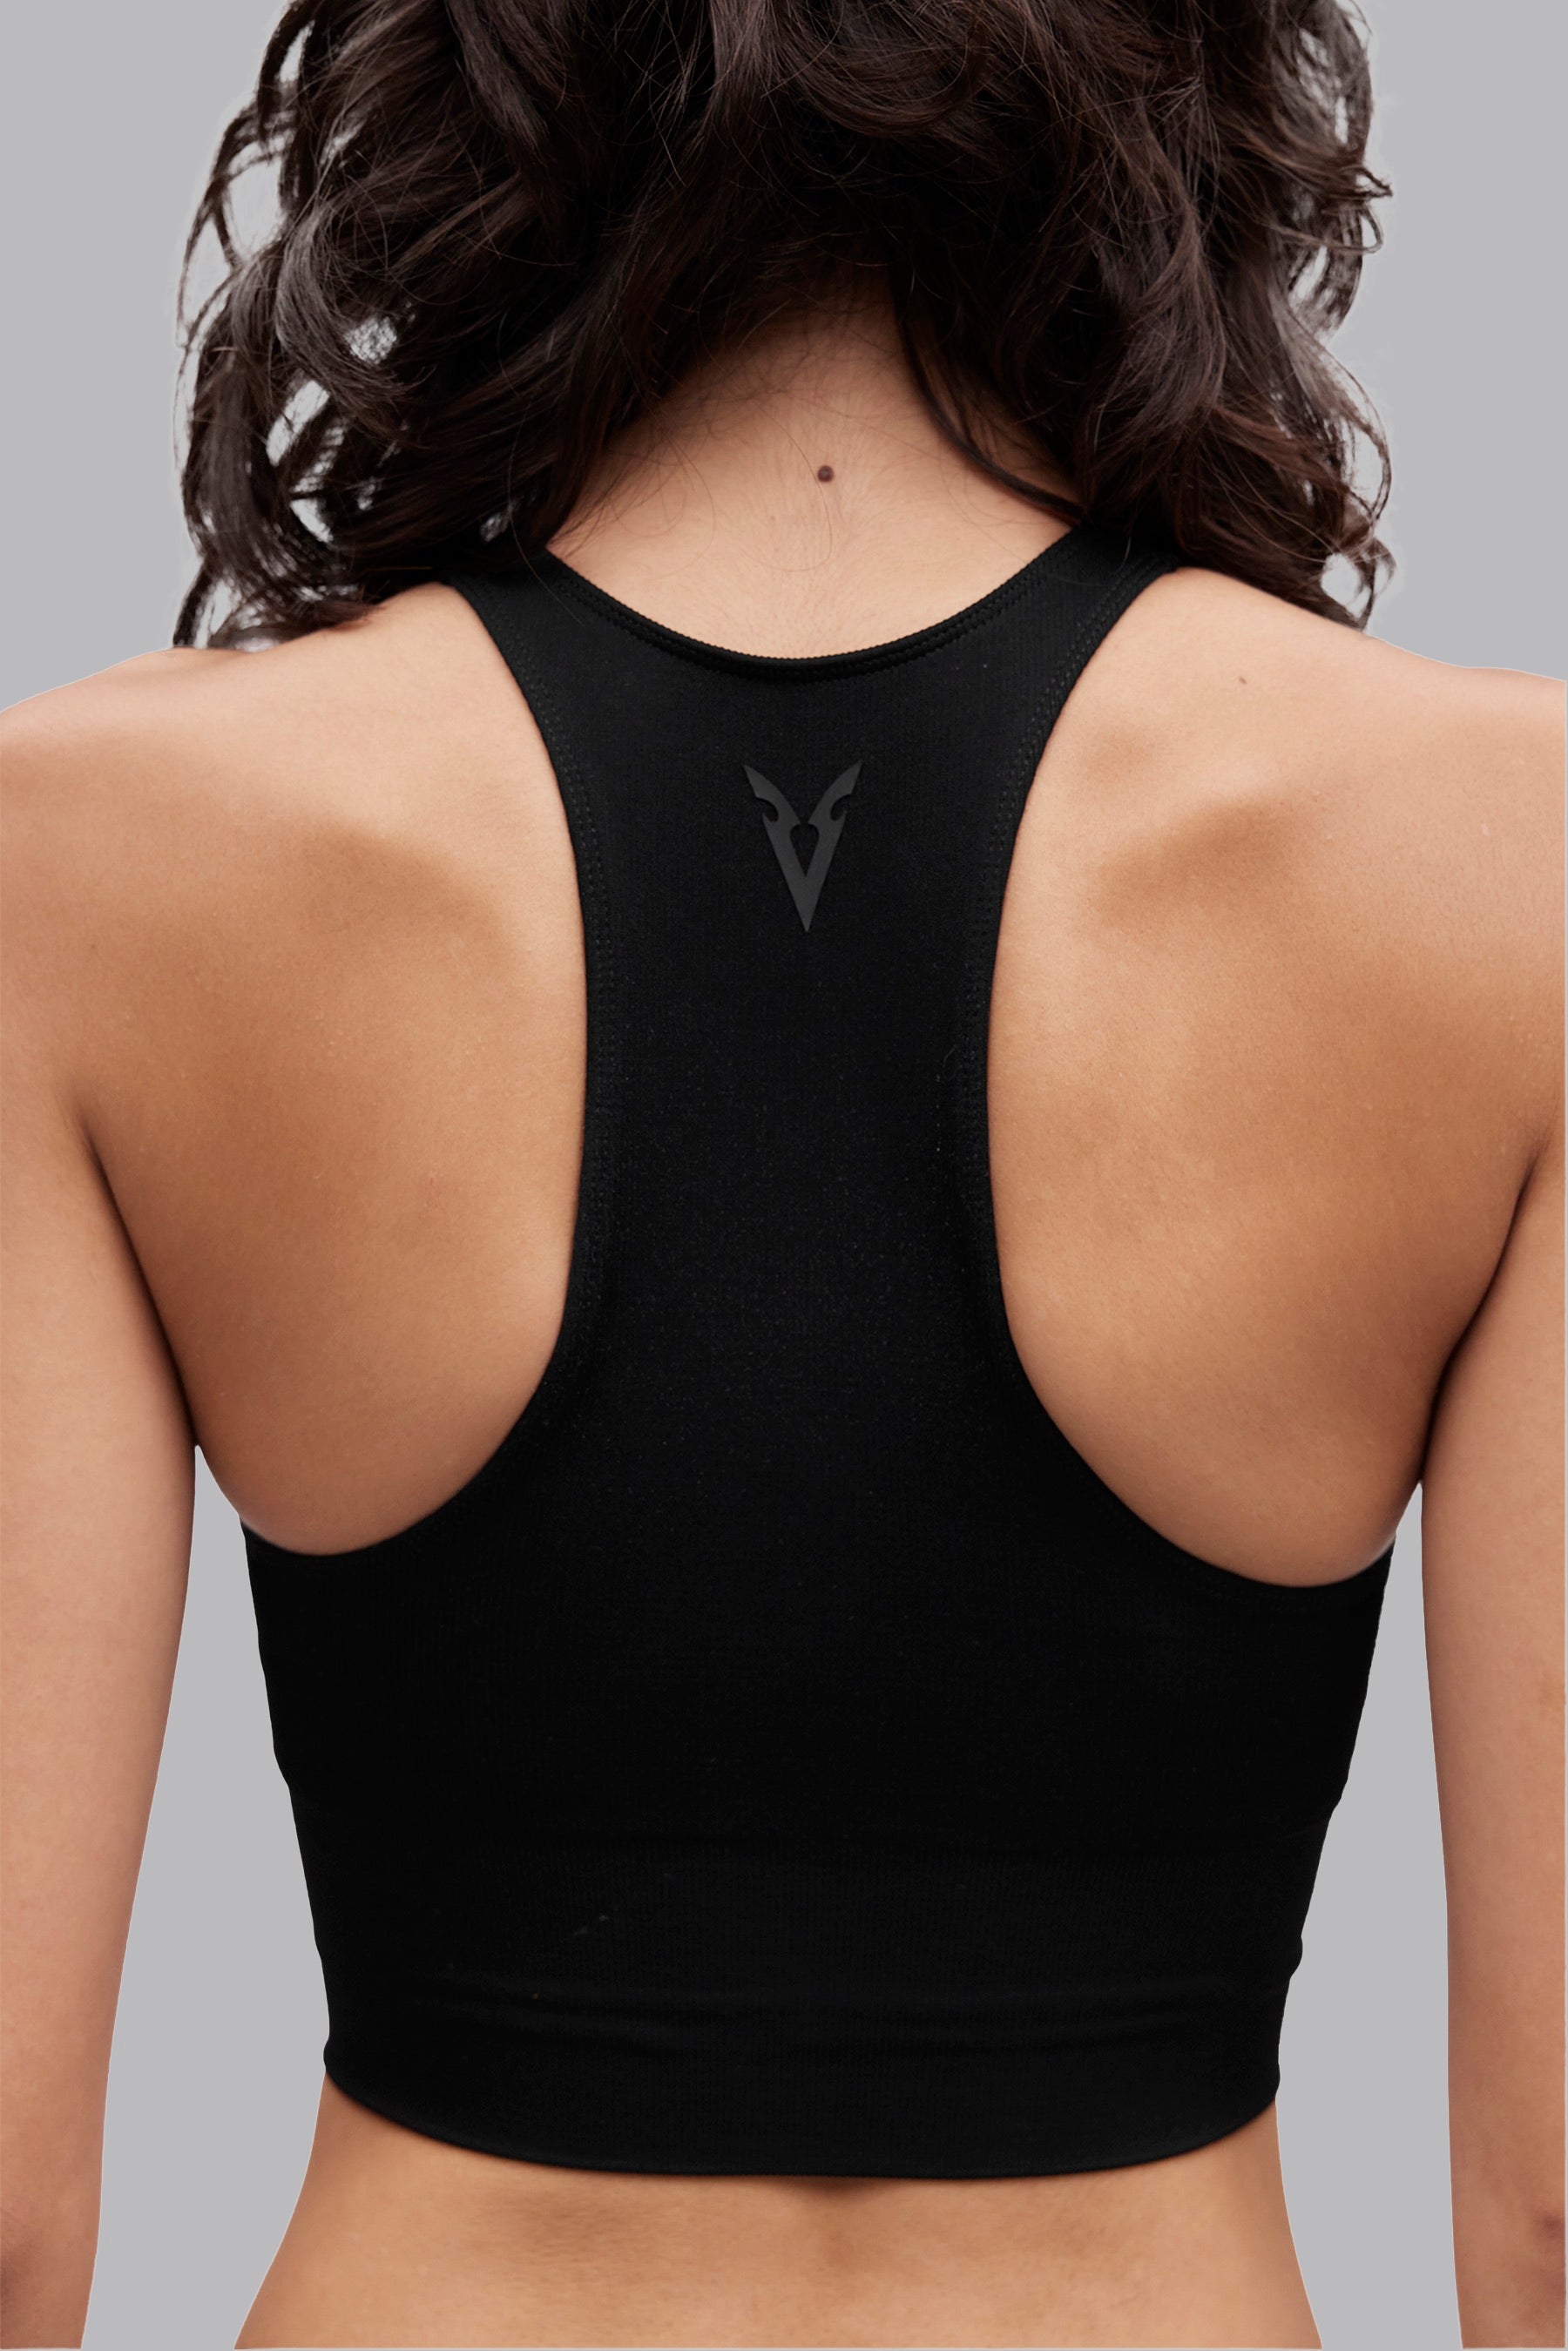 Vedolay Sports Bras,Women's Fashion Deep Cup Bra, Incorporated